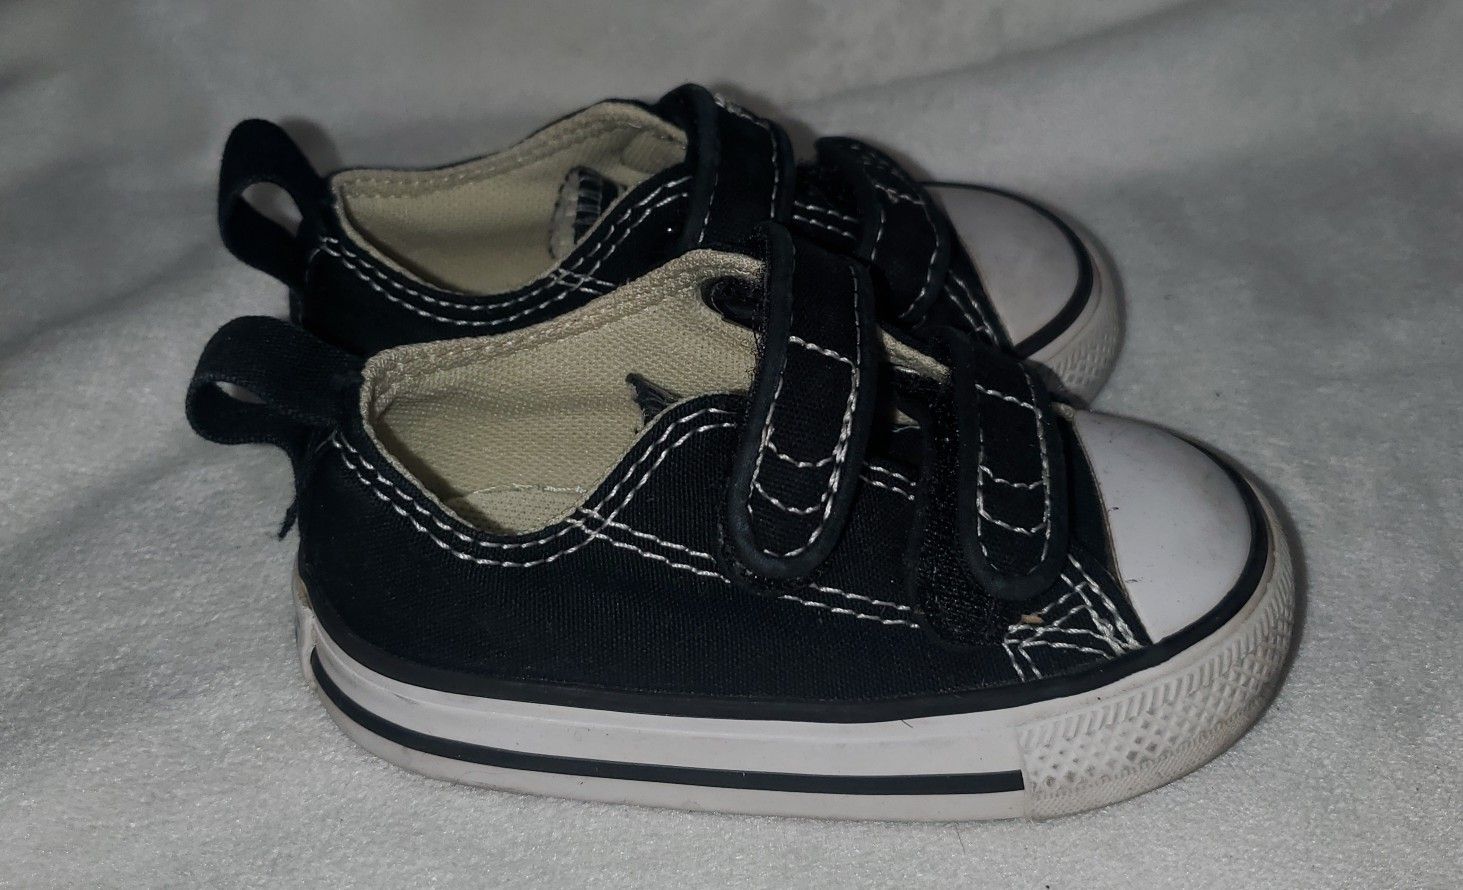 Vans Baby/ Toddler Size 4 Shoes 